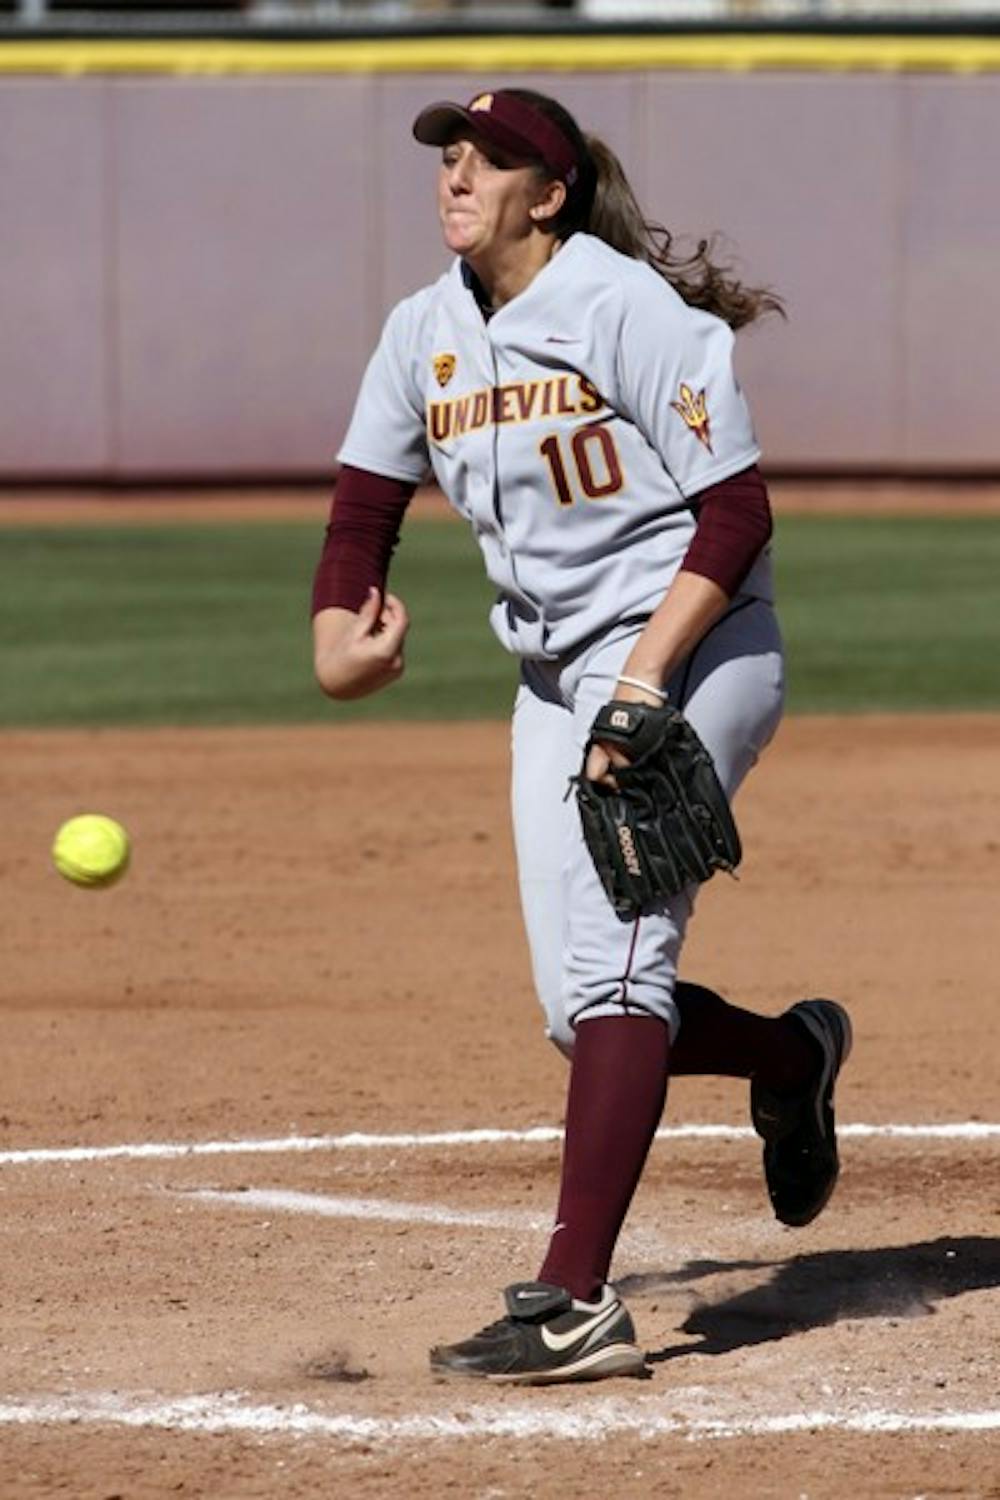 ASU senior pitcher Hillary Bach launches a pitch against New Mexico State on March 11. Bach pitched her seventh shutout of the season Thursday against BYU. (Photo by Sam Rosenbaum)